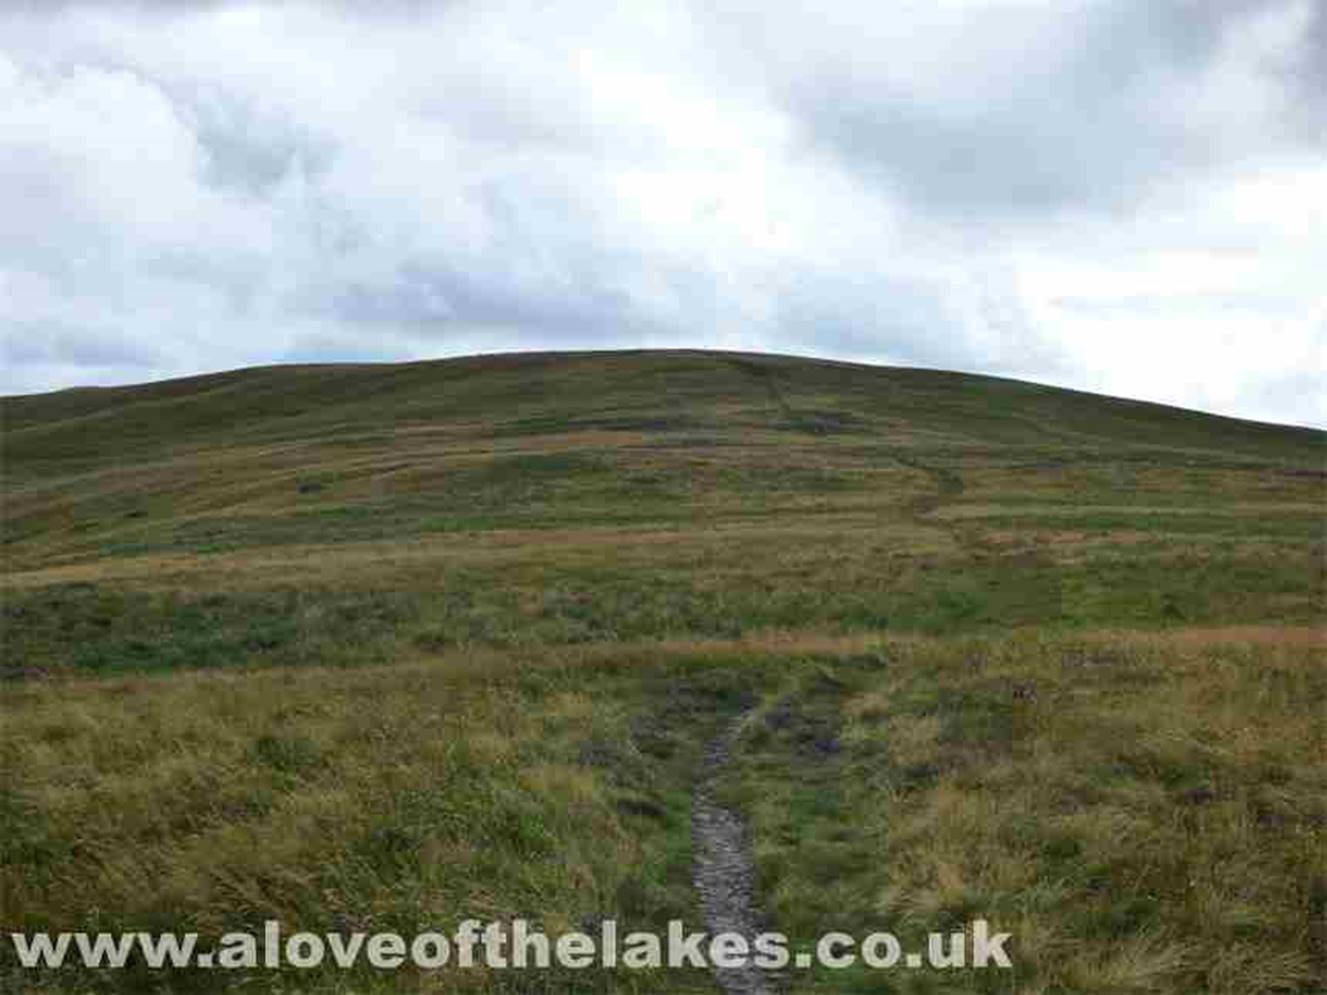 Further up the path and the metal fence post just about visible marks the summit